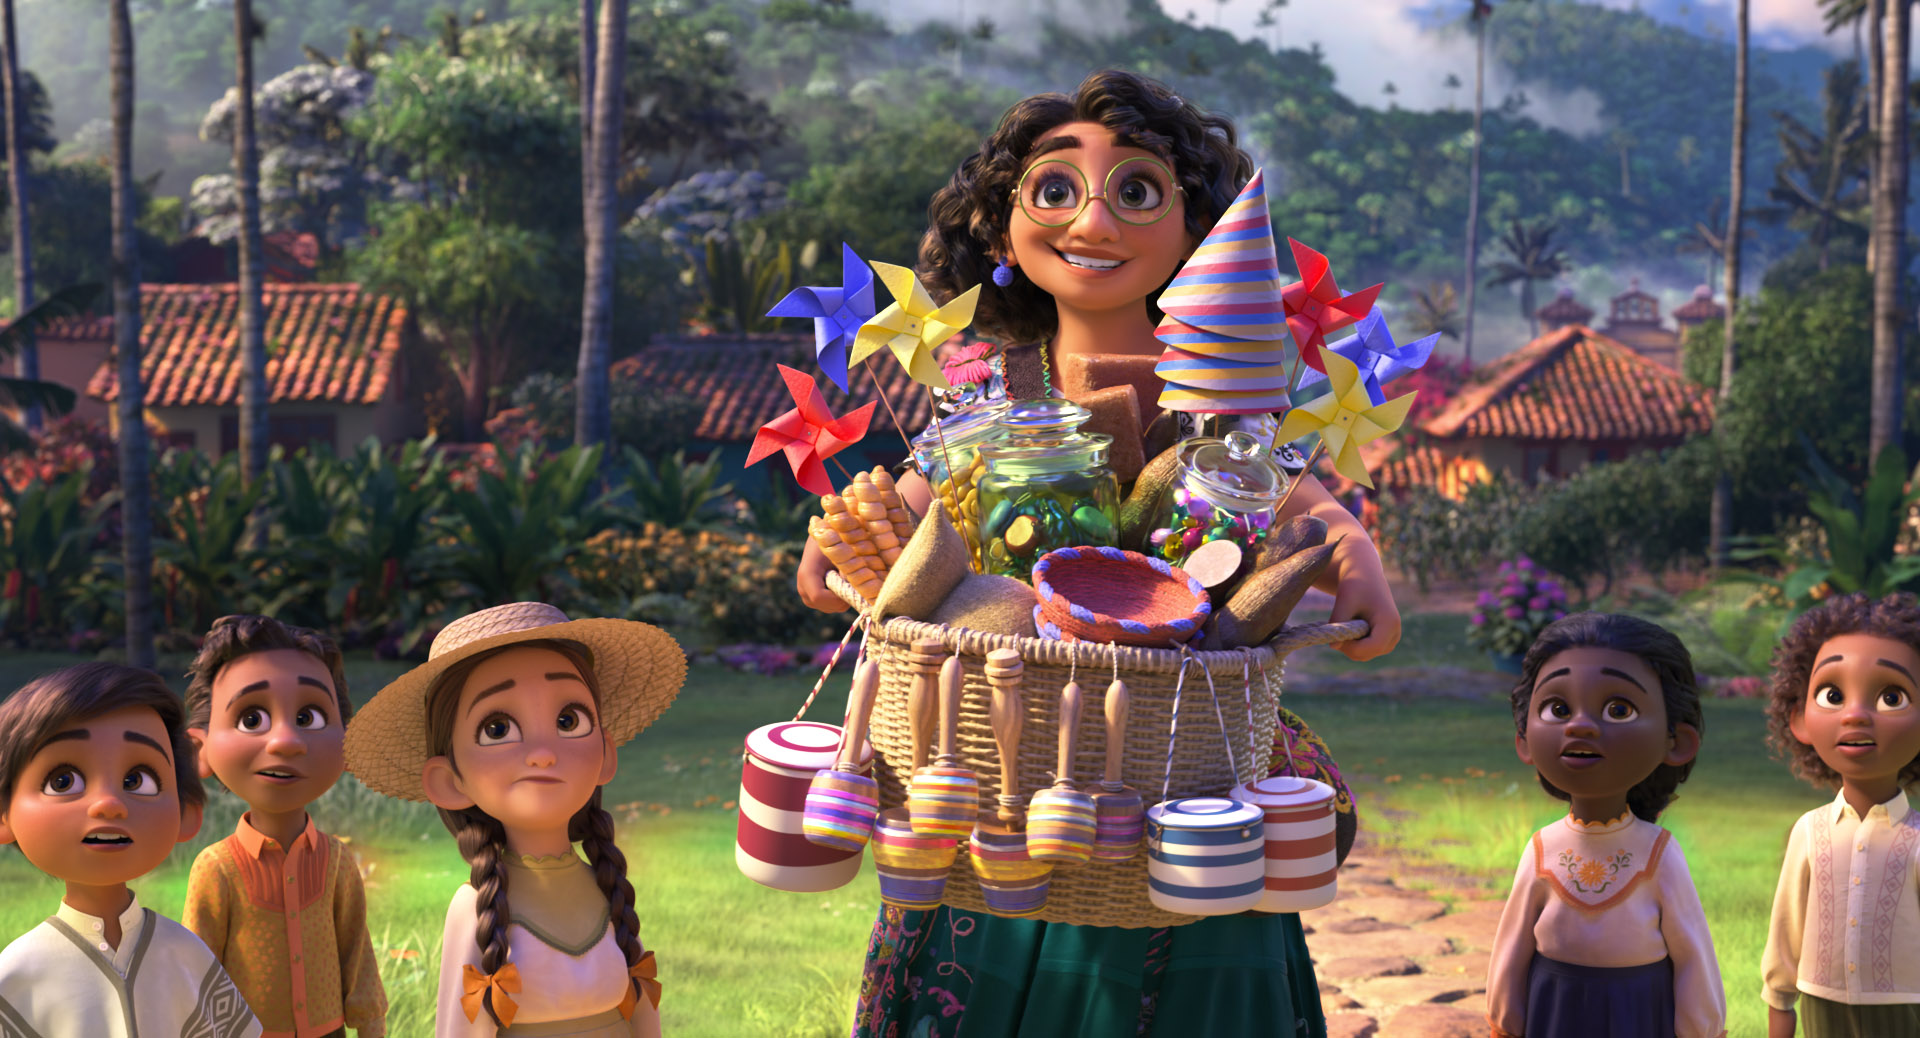 Image from “Encanto” of the character Mirabel standing in front of cloud forests